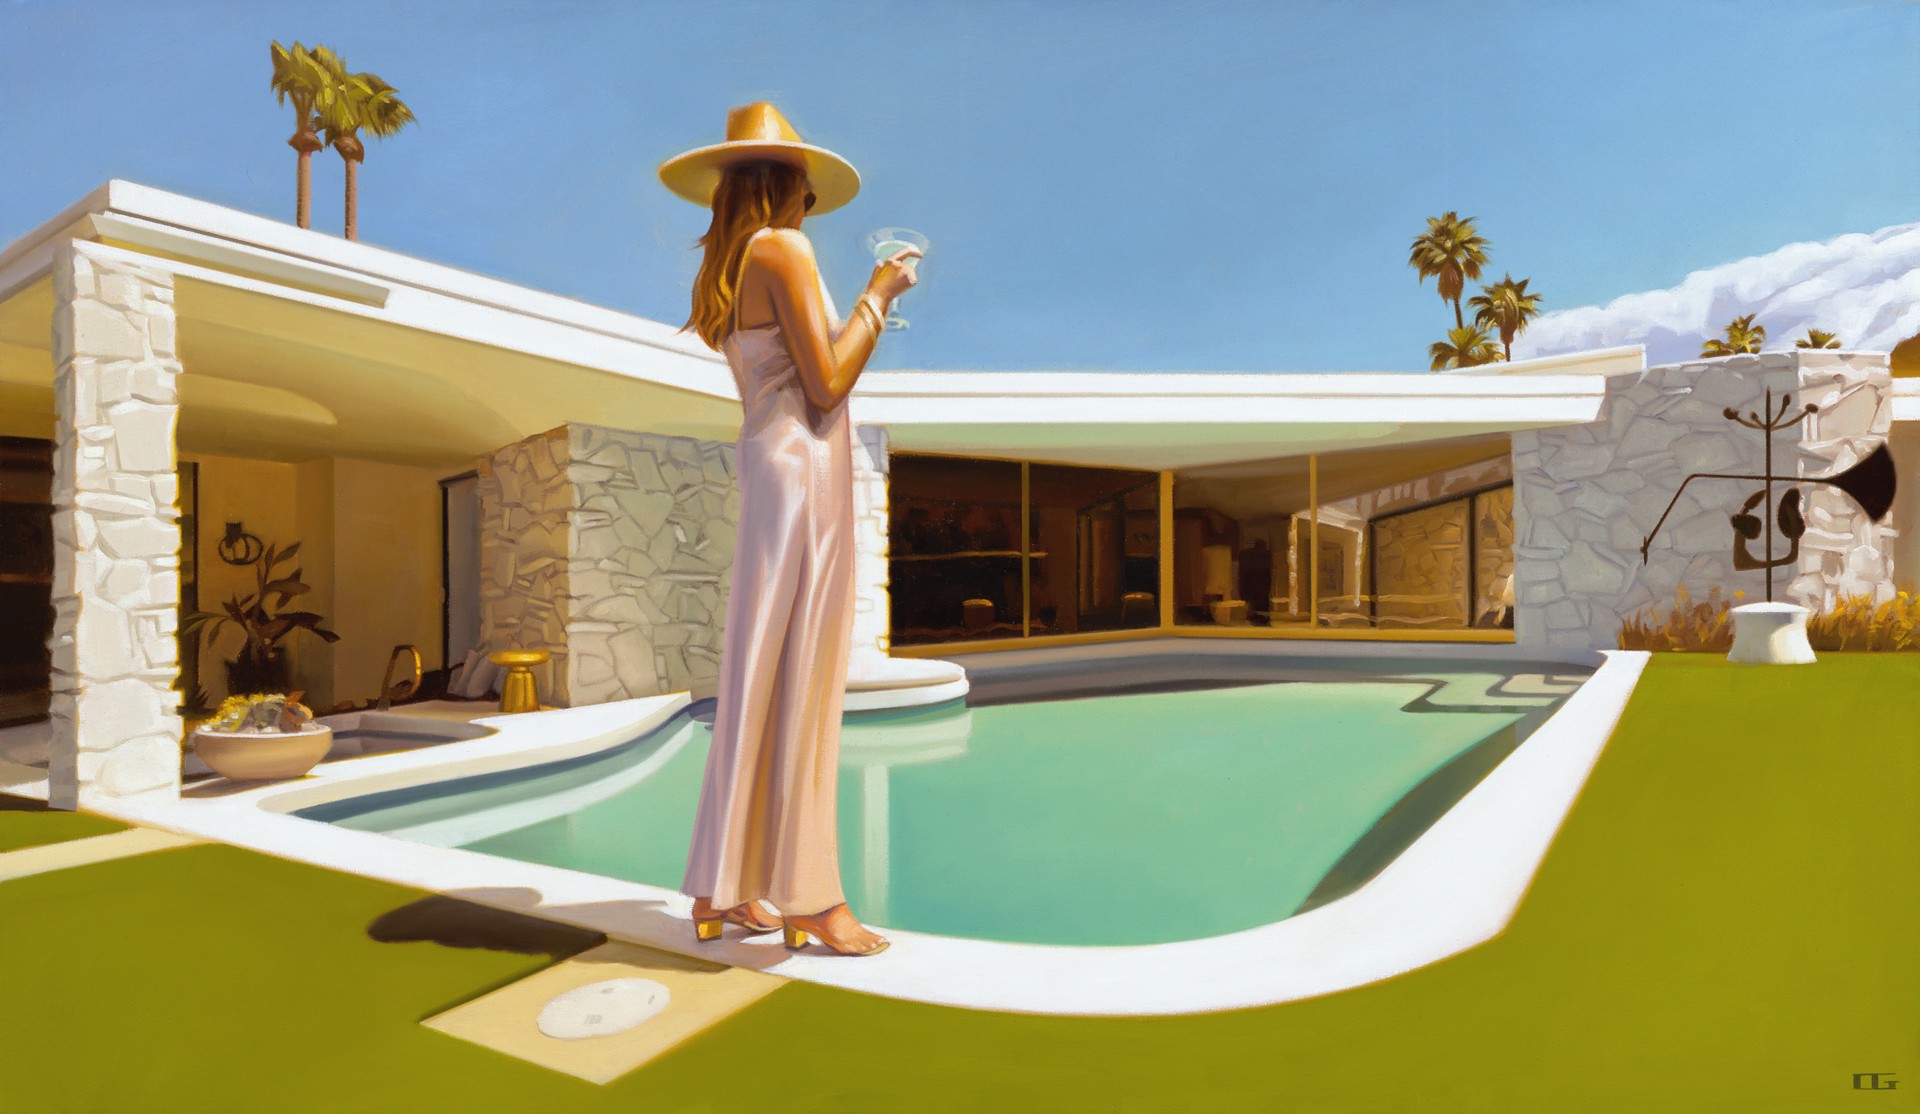 Palm Springs Perspective 2 by Carrie Graber